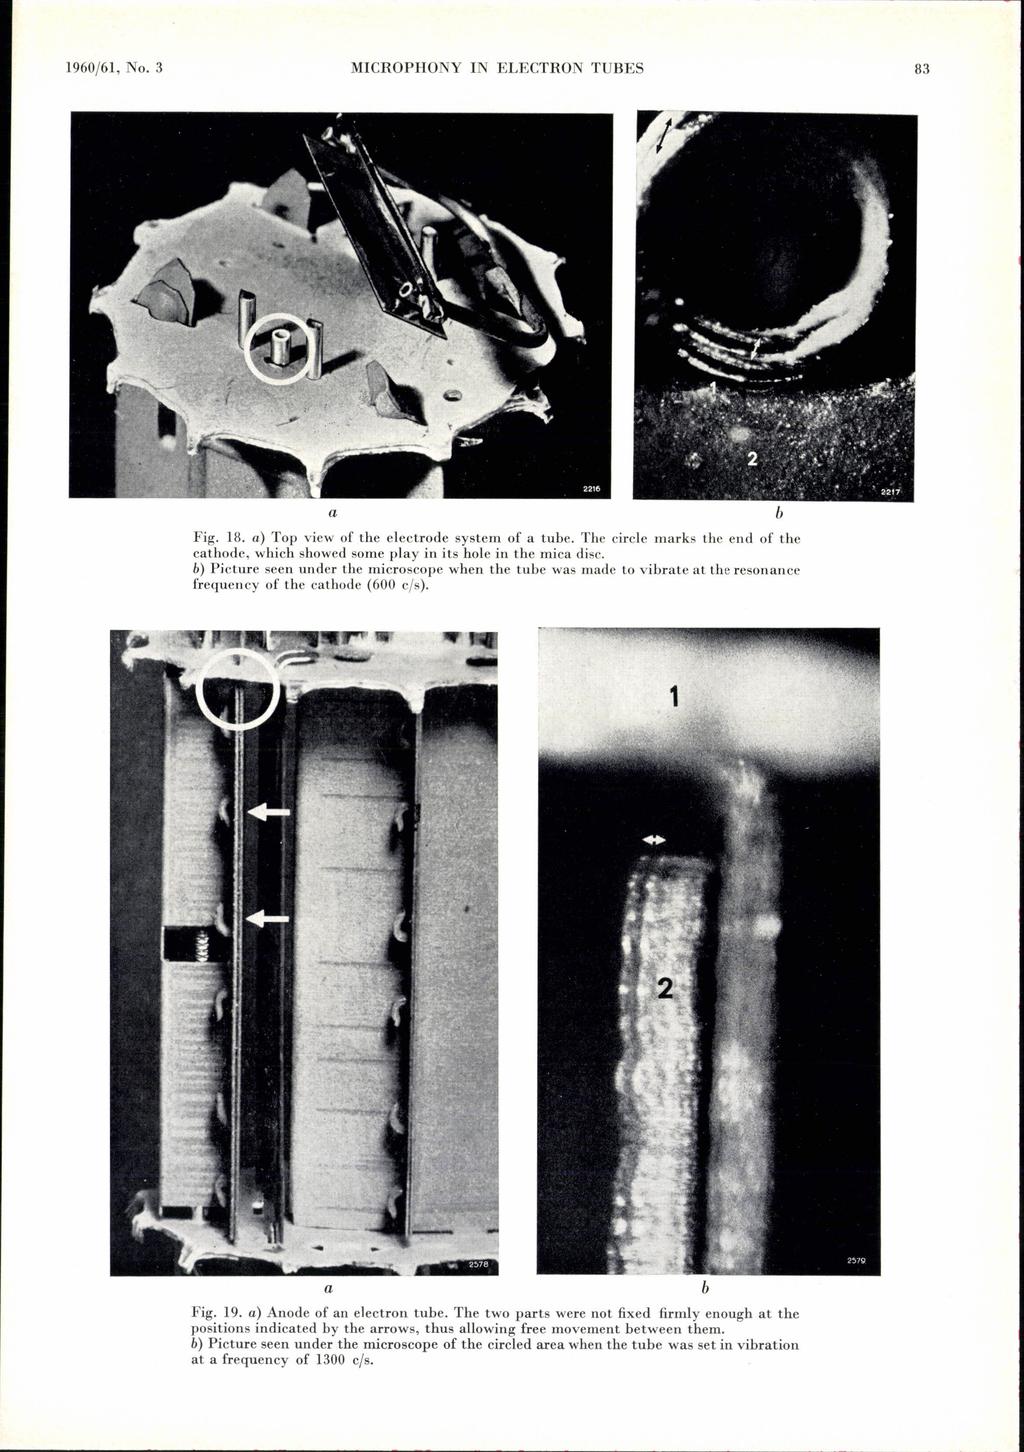 1960/61, No. 3 MICROPHONY IN ELECTRON TUBES 83 Fig. 18. ) Top view of the electrode system of tue. The circle mrks the end of the cthode, which showed some ply in its hole in the mic disc.